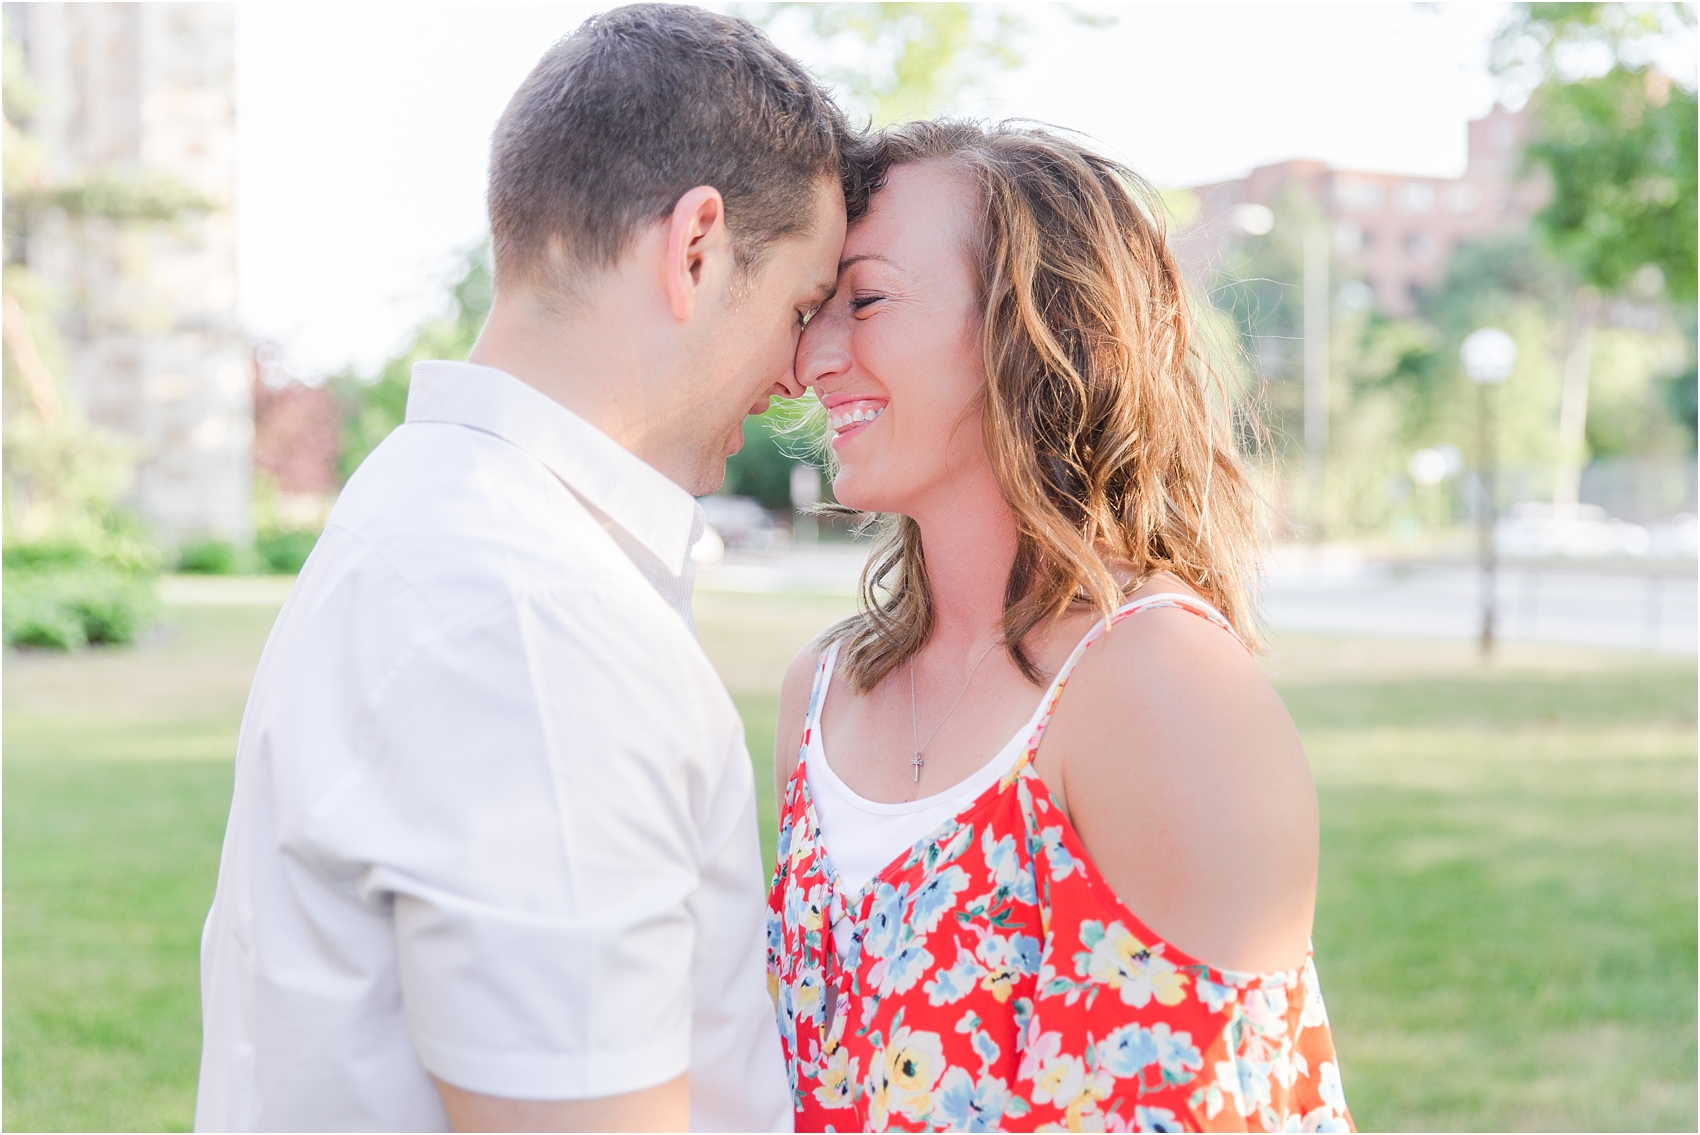 fun-adventurous-engagement-photos-at-the-nickels-arcade-in-ann-arbor-mi-by-courtney-carolyn-photography_0019.jpg